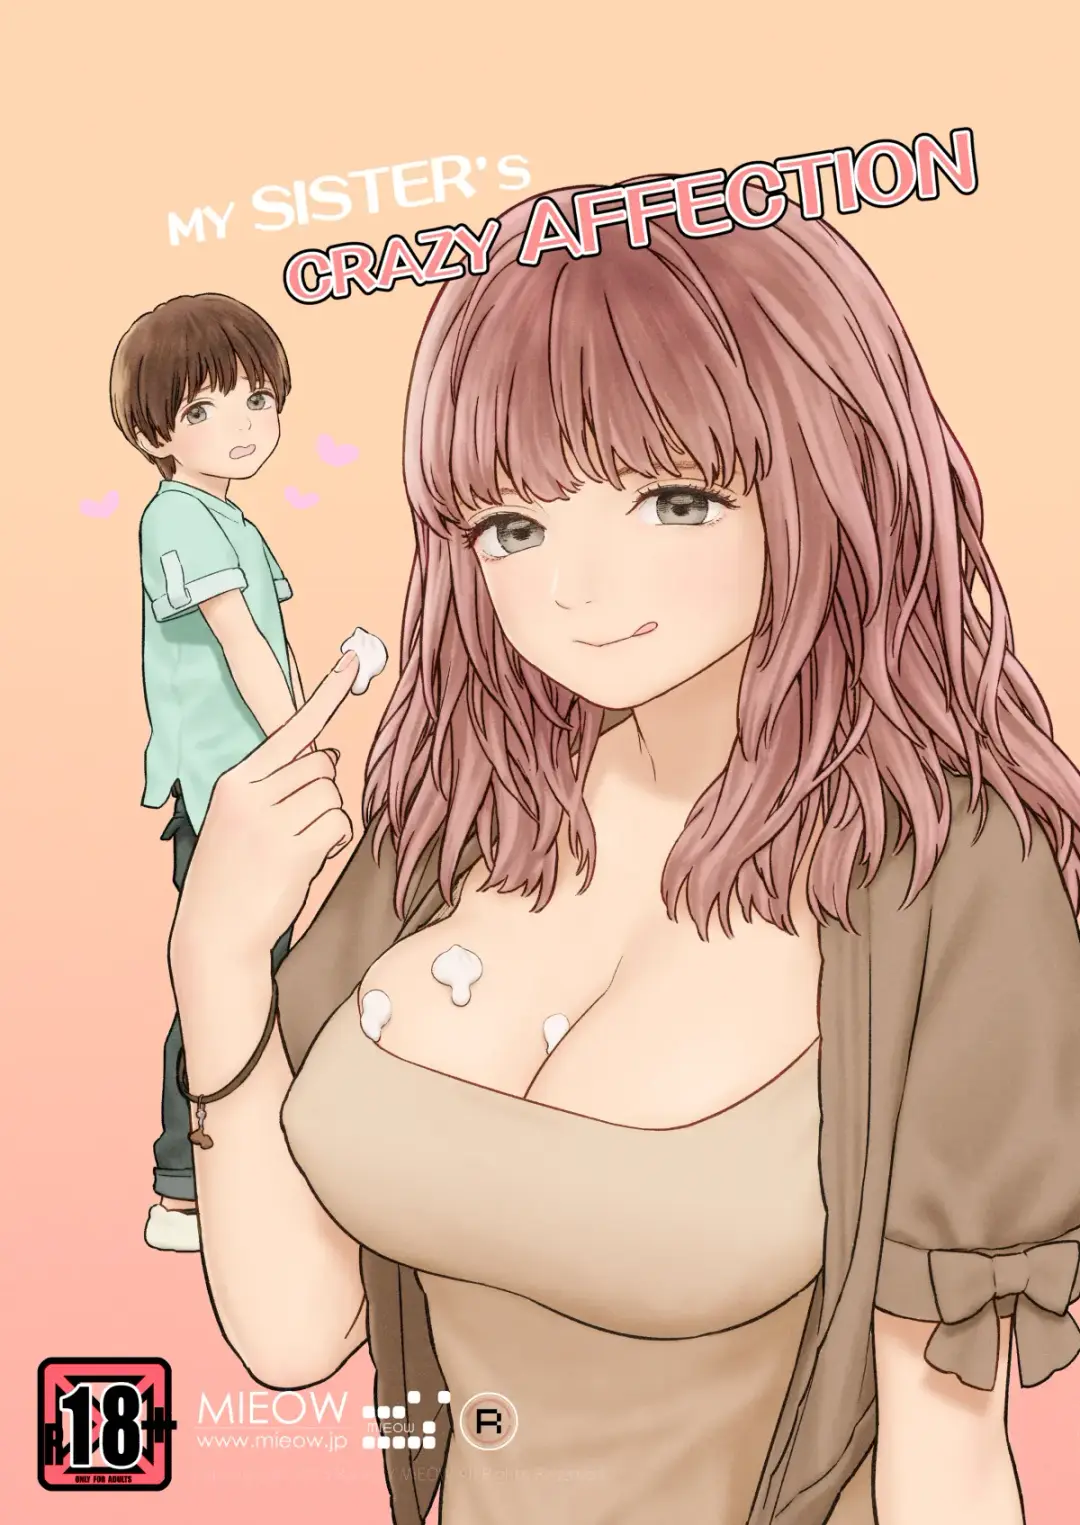 Read [Rustle] MY SISTER'S CRAZY AFFECTION - Fhentai.net